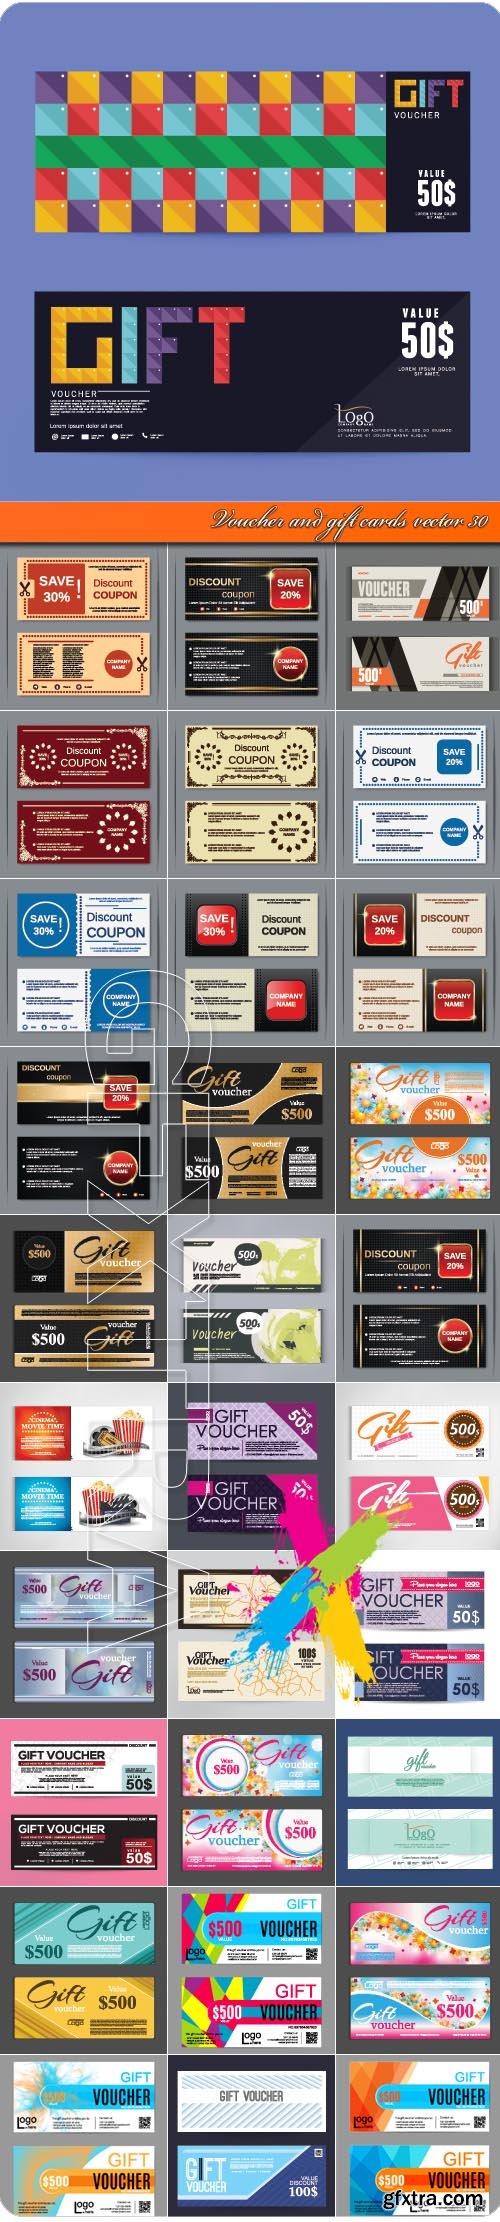 Voucher and gift cards vector 30